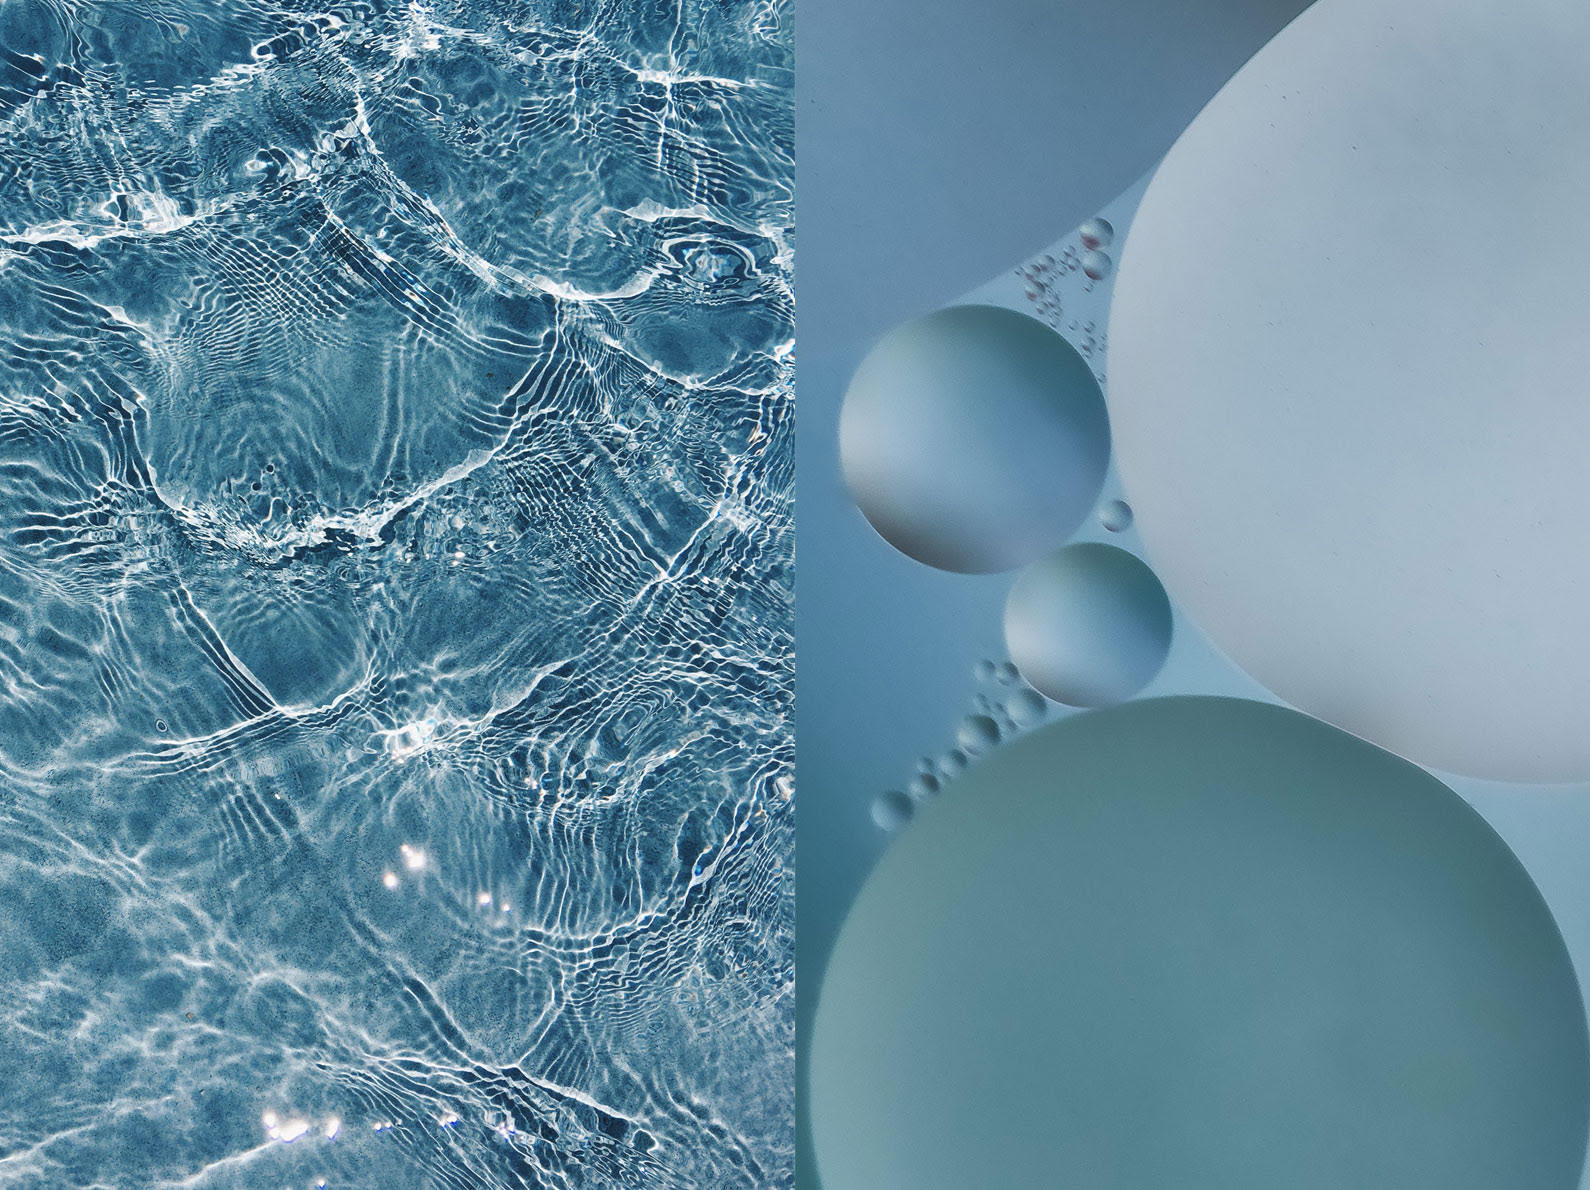 Split image of top view of ocean water on the left with close up of water droplets on the right. 